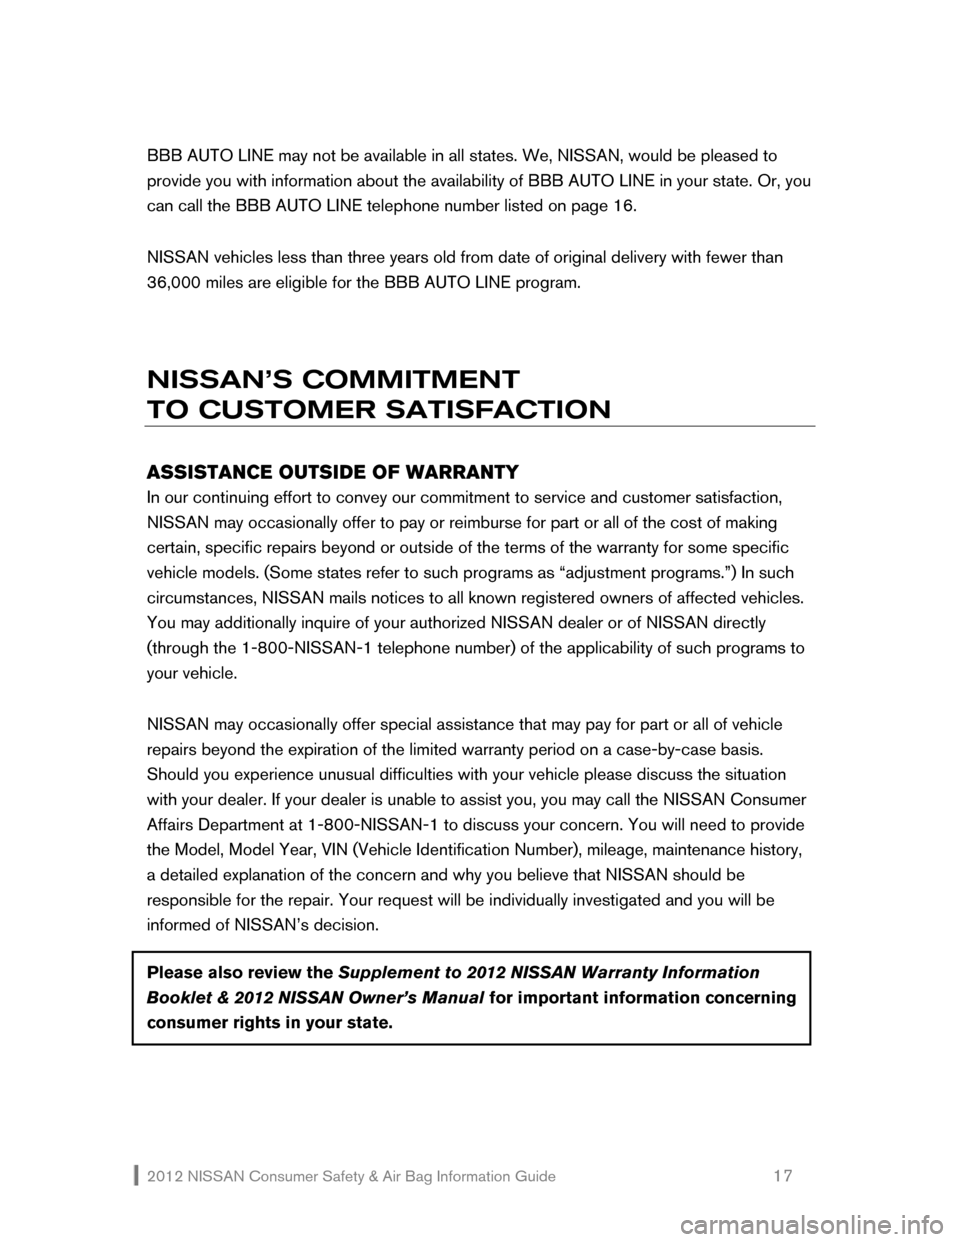 NISSAN NV200 2012 1.G Consumer Safety Air Bag Information Guide 2012 NISSAN Consumer Safety & Air Bag Information Guide                                                   17 
BBB AUTO LINE may not be available in all states. We, NISSAN, would be pleased to 
provide